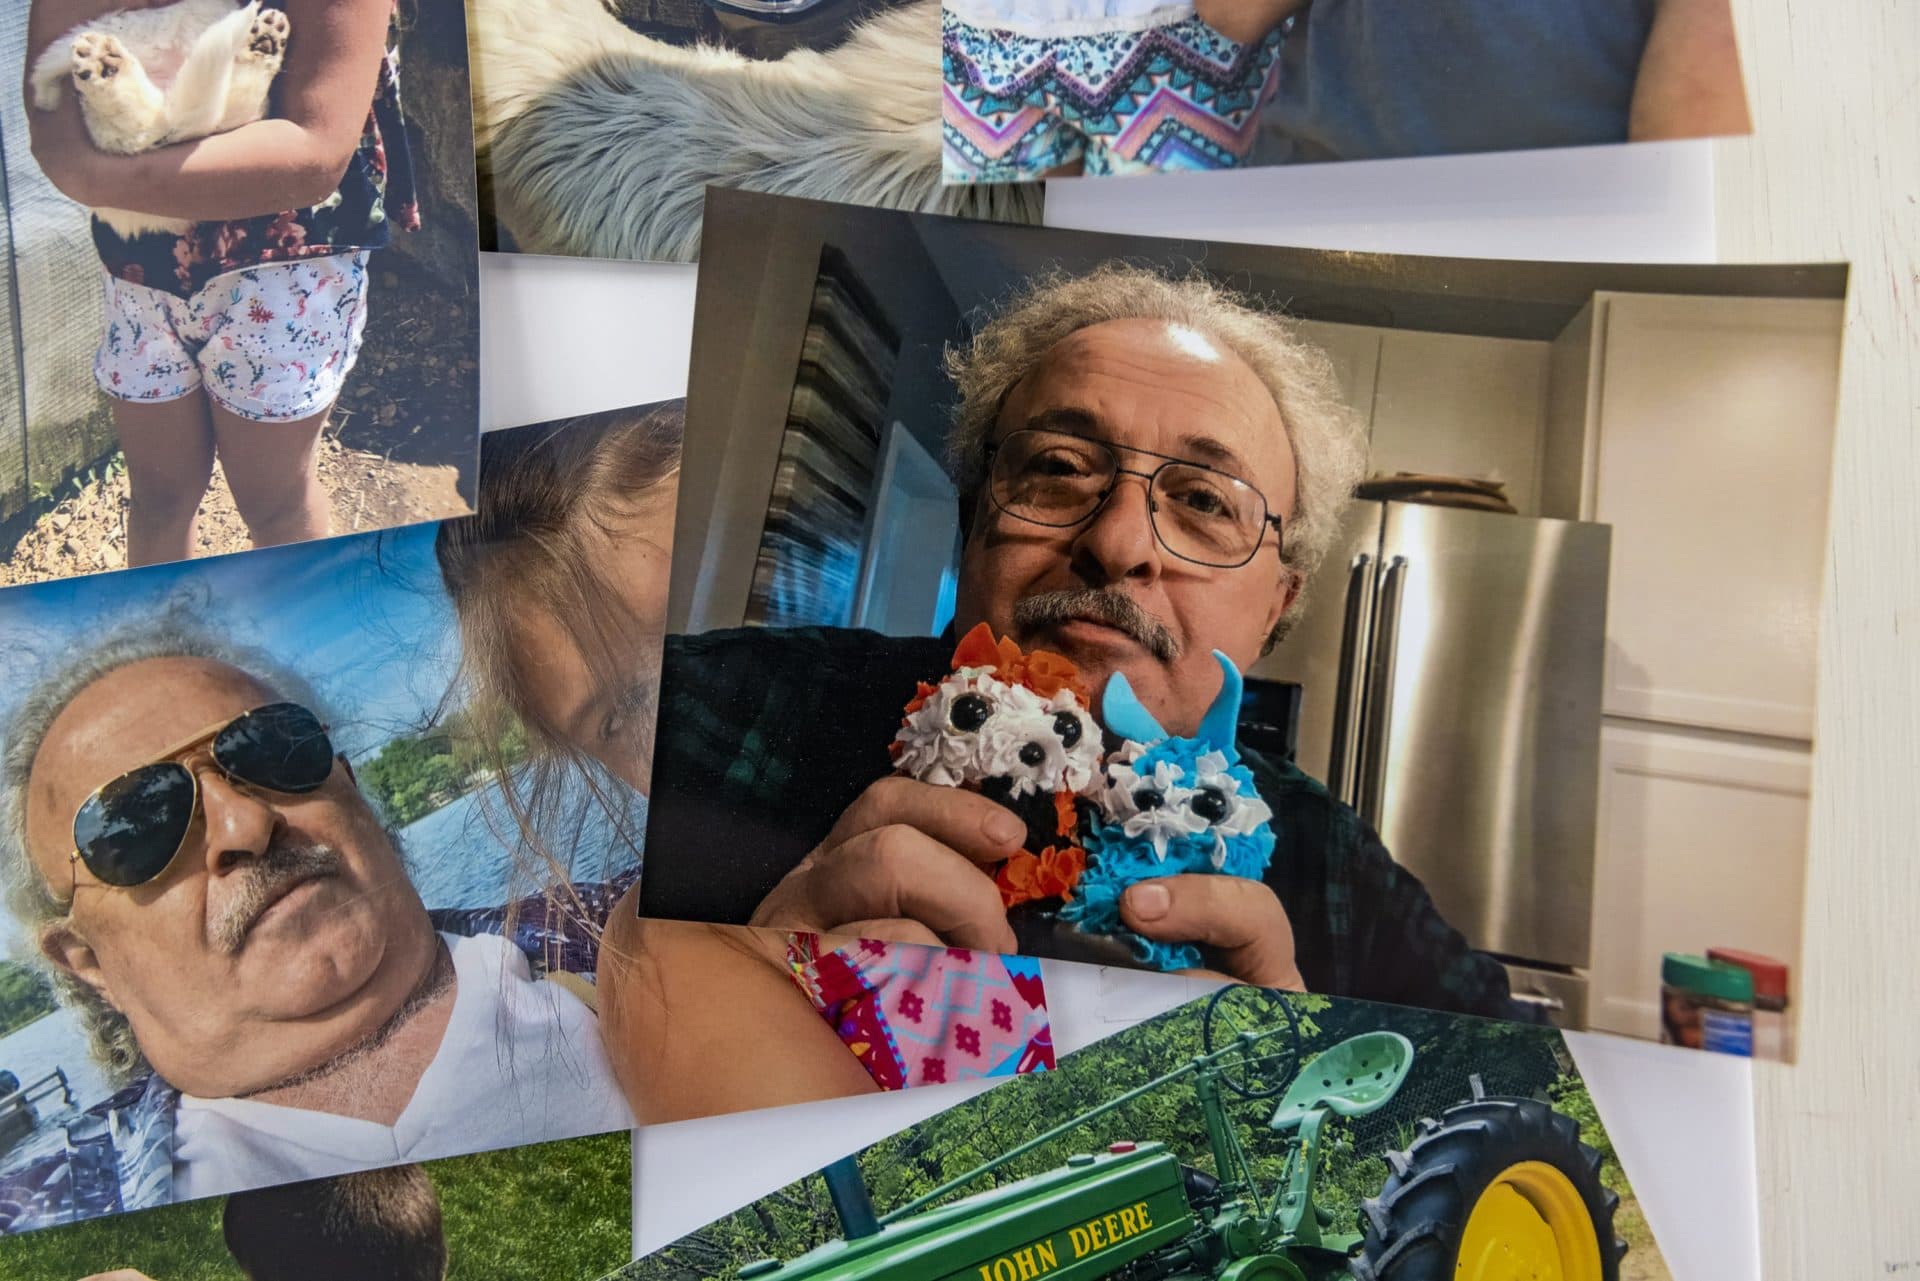 A photo of Tony Tsantinis hangs in a collage of other photos set up for a celebration of his life on the final day Athens Pizza in Brimfield was opened for business. (Jesse Costa/WBUR)